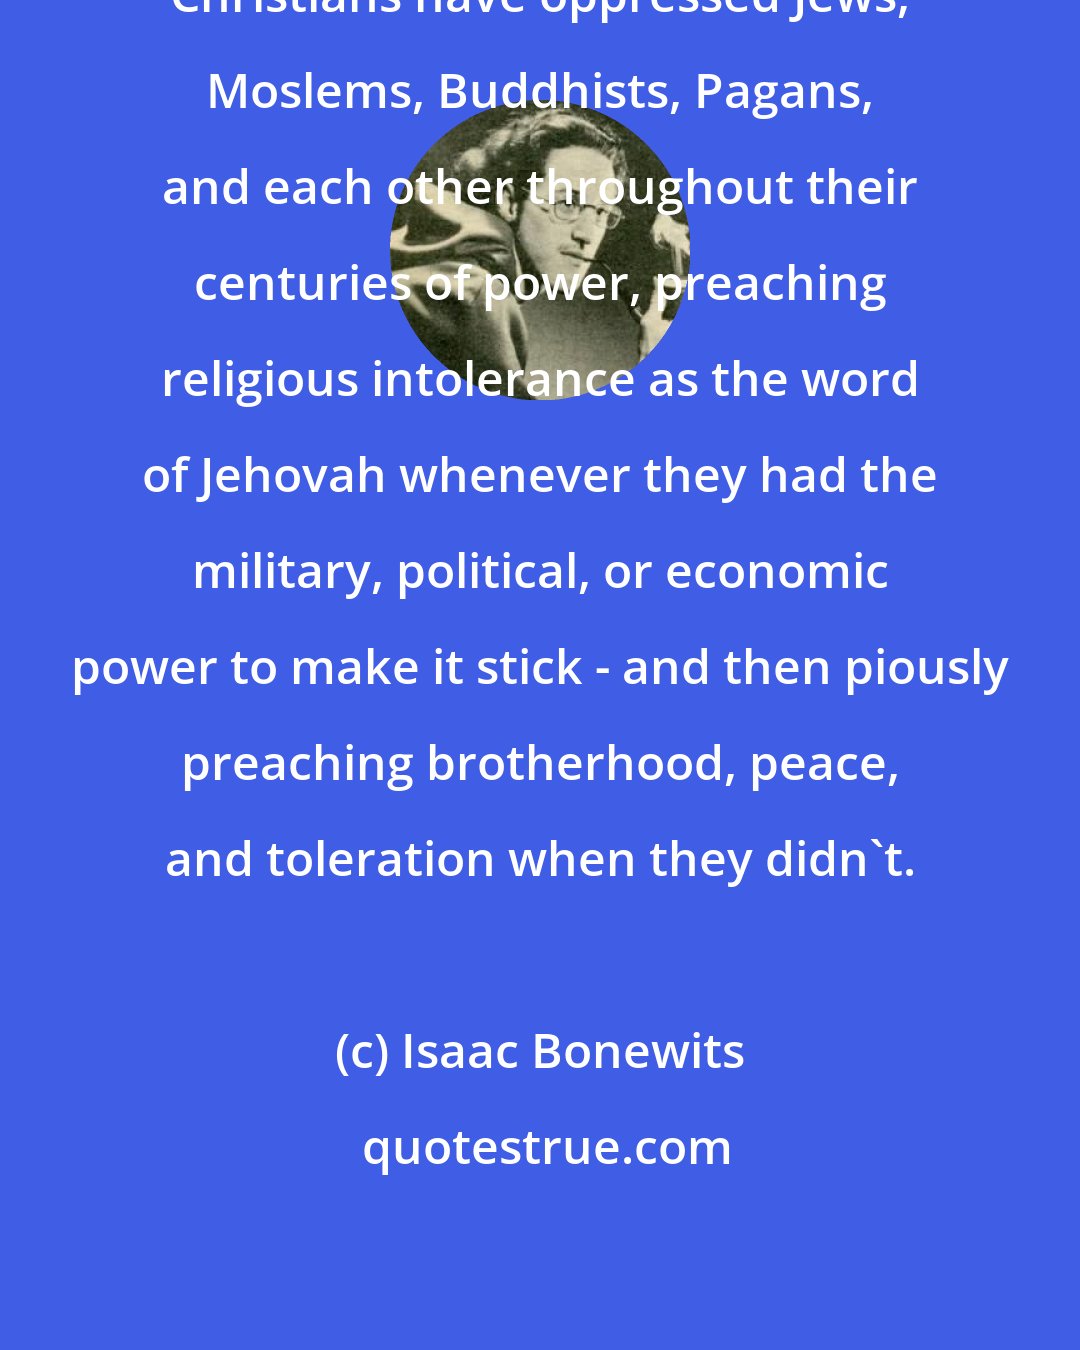 Isaac Bonewits: Christians have oppressed Jews, Moslems, Buddhists, Pagans, and each other throughout their centuries of power, preaching religious intolerance as the word of Jehovah whenever they had the military, political, or economic power to make it stick - and then piously preaching brotherhood, peace, and toleration when they didn't.